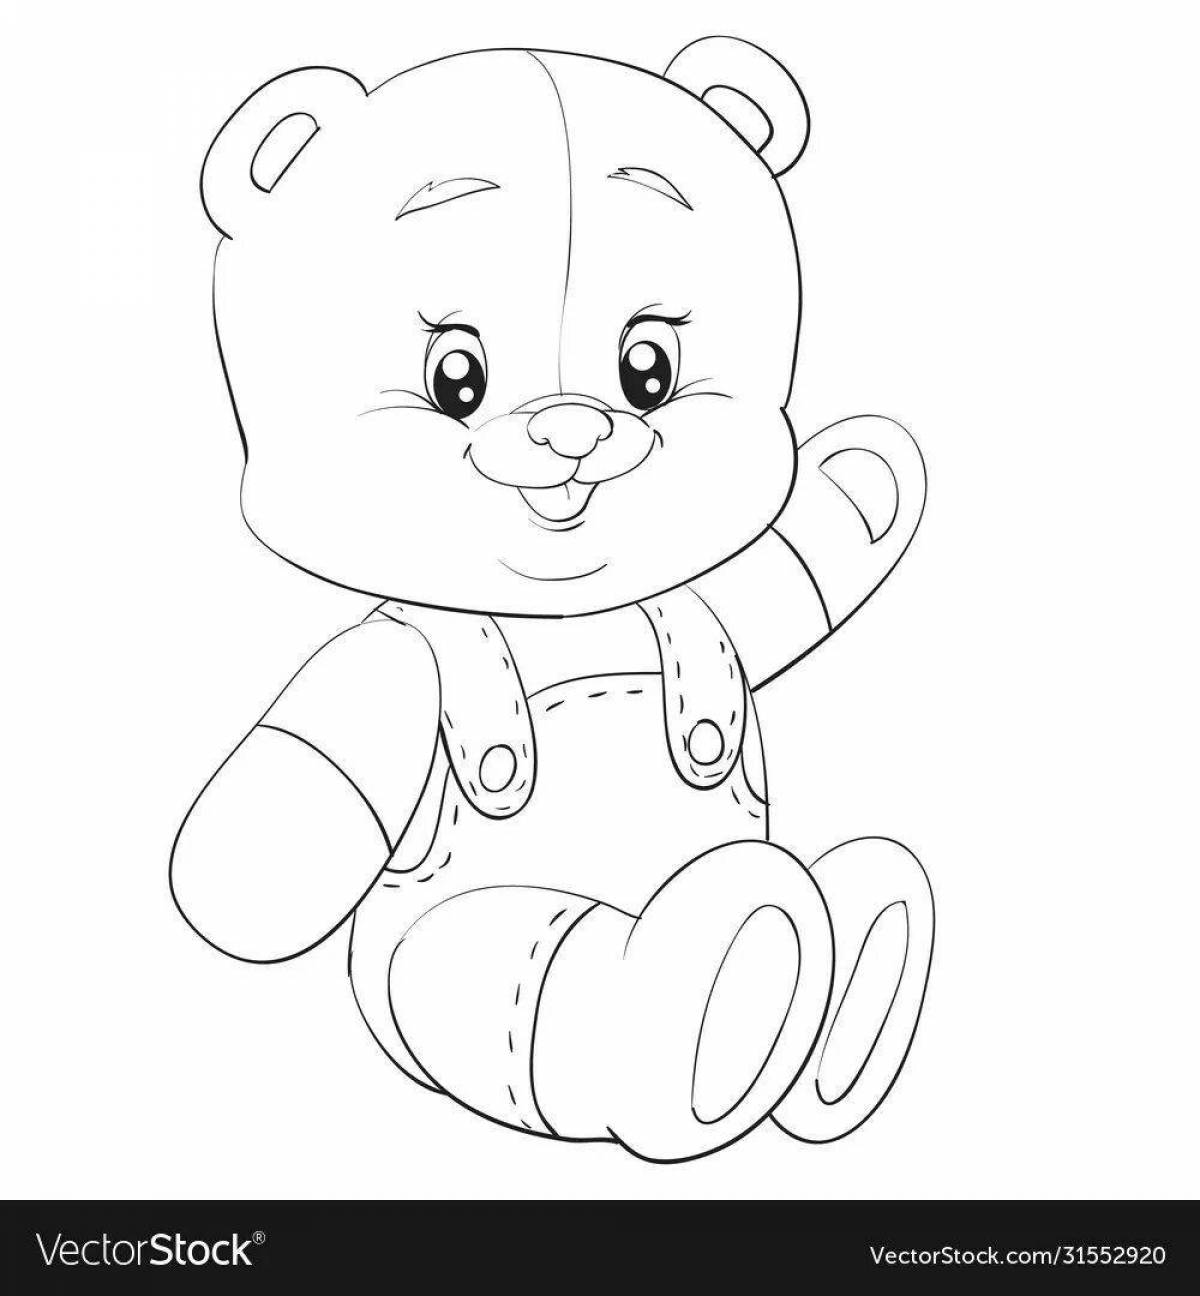 Coloring page adorable teddy bear in baby pants